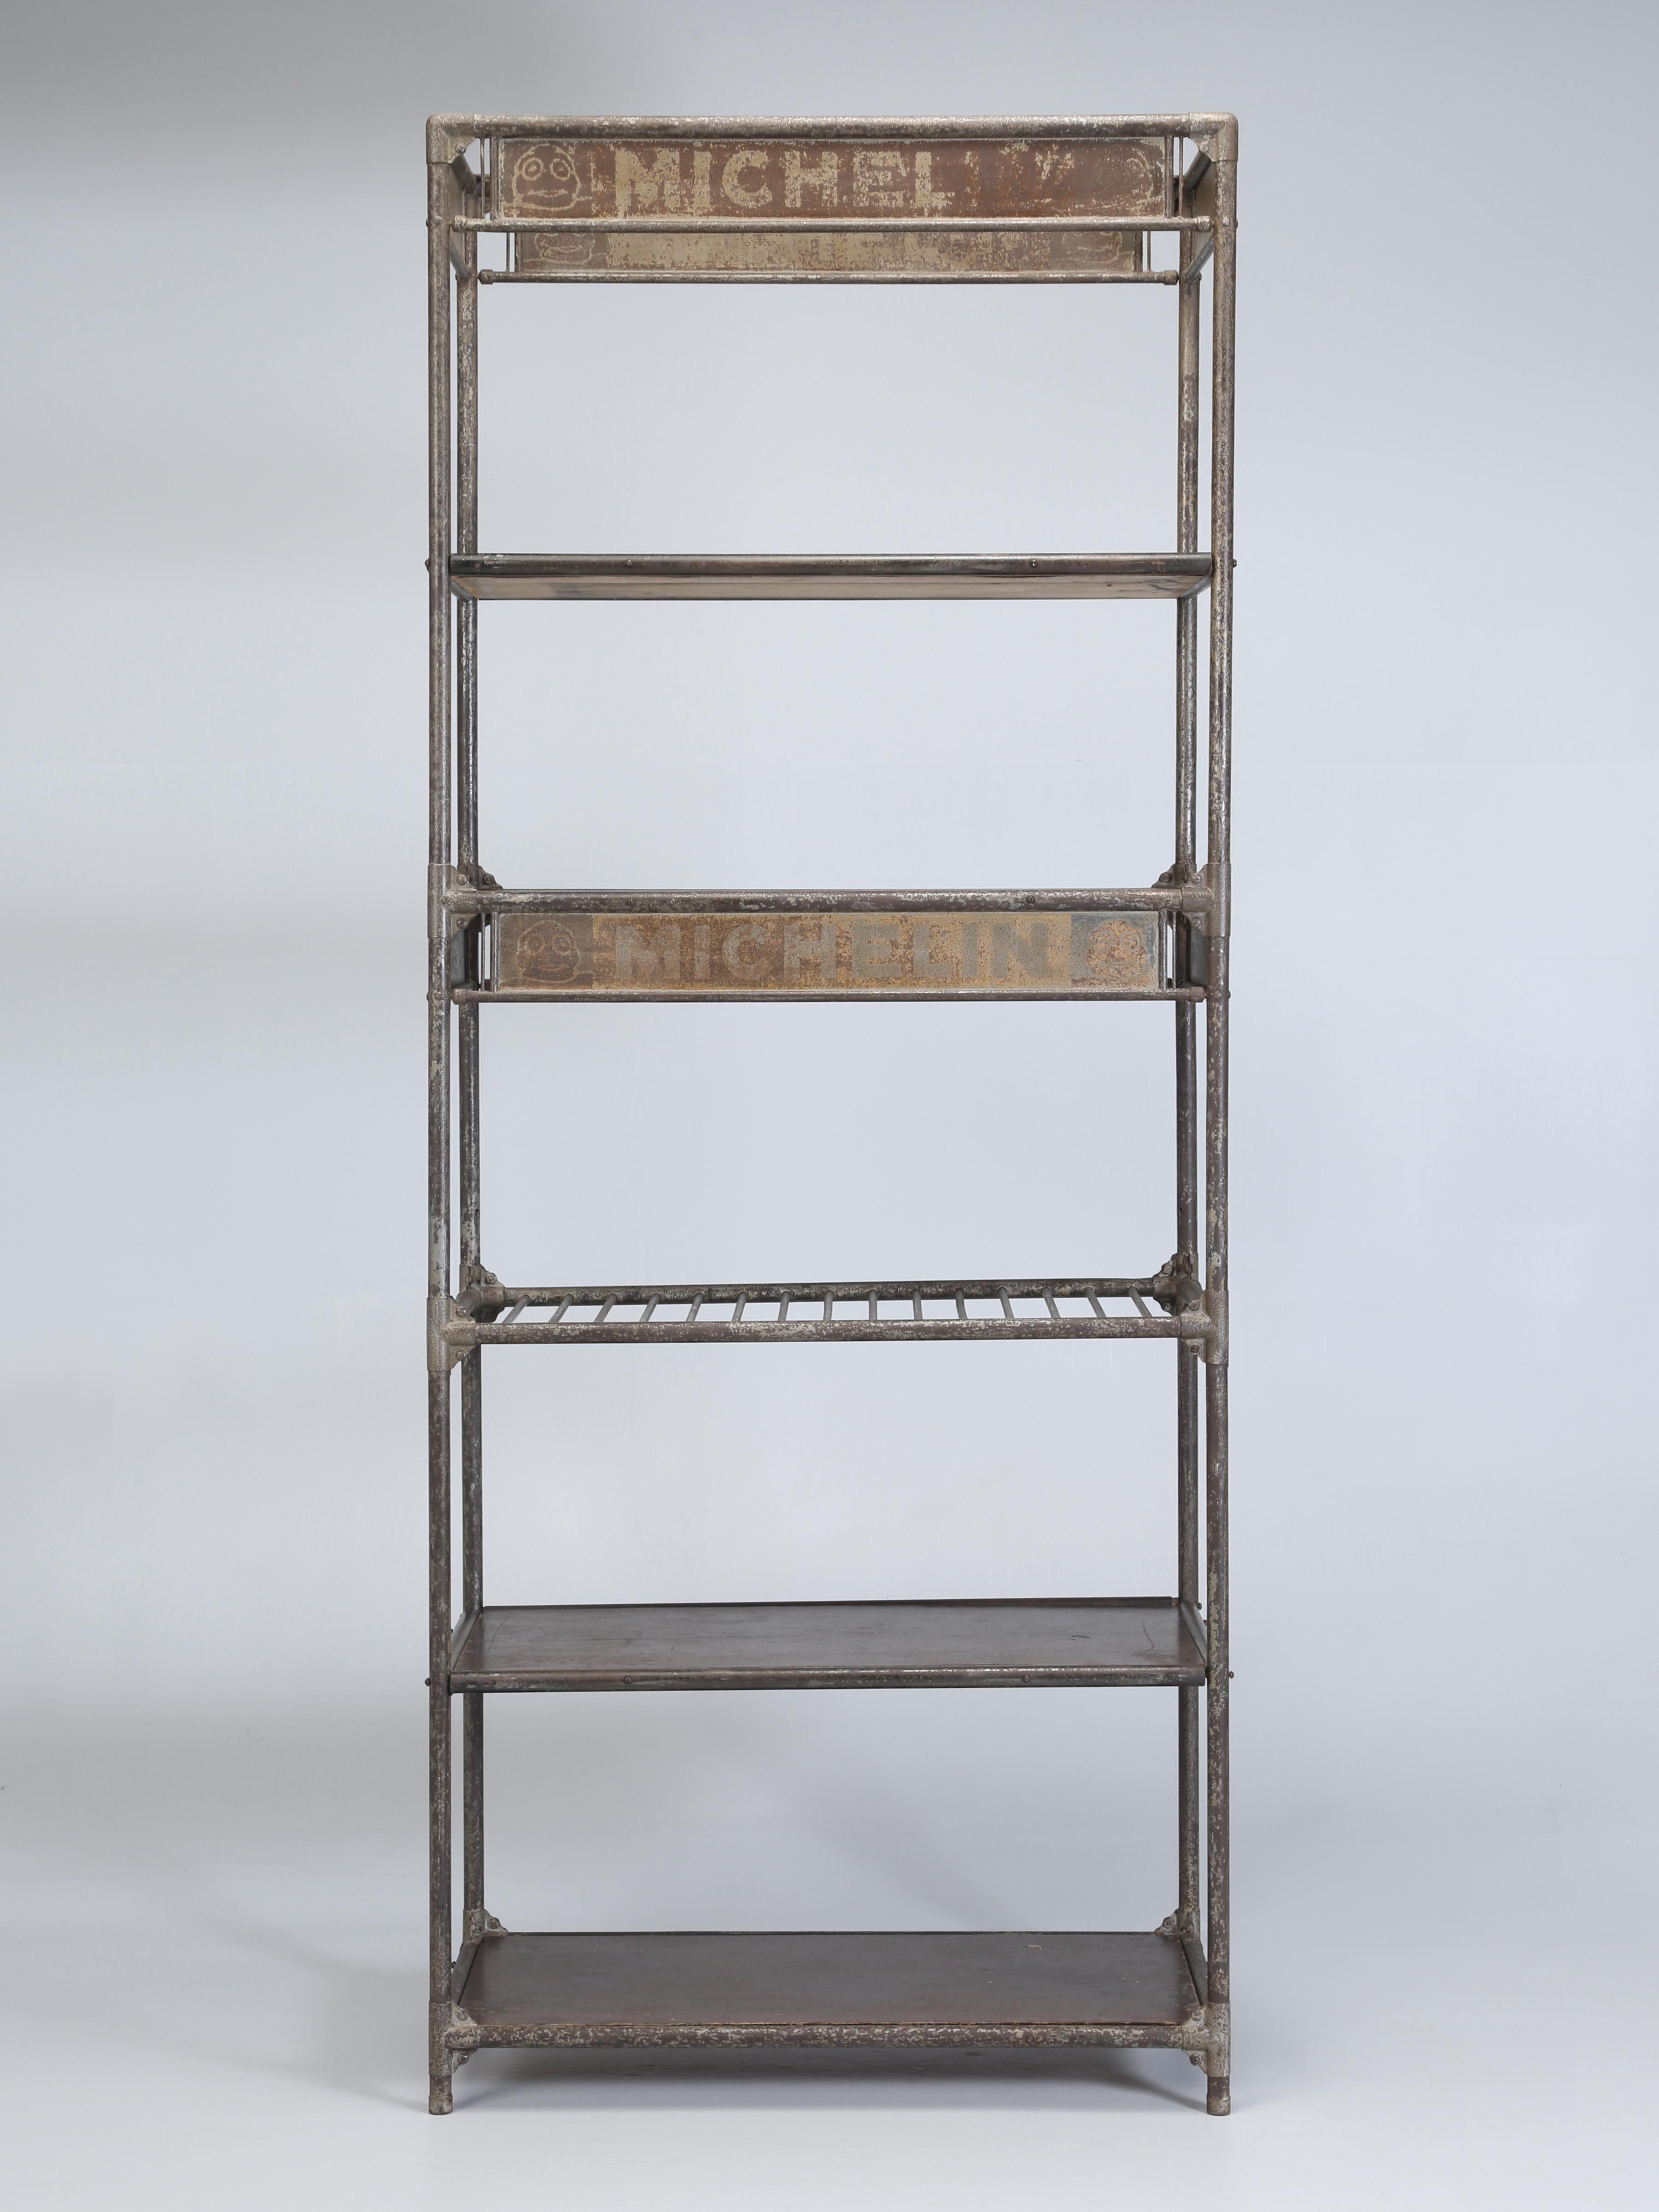 Antique French Industrial Steel Shelf Unit (étagère since it is French) probably made for a Michelin Tire dealer between 1900 and 1920. We deliberately chose to leave the étagère in its all-original finish, for the Michelin lettering and Michelin